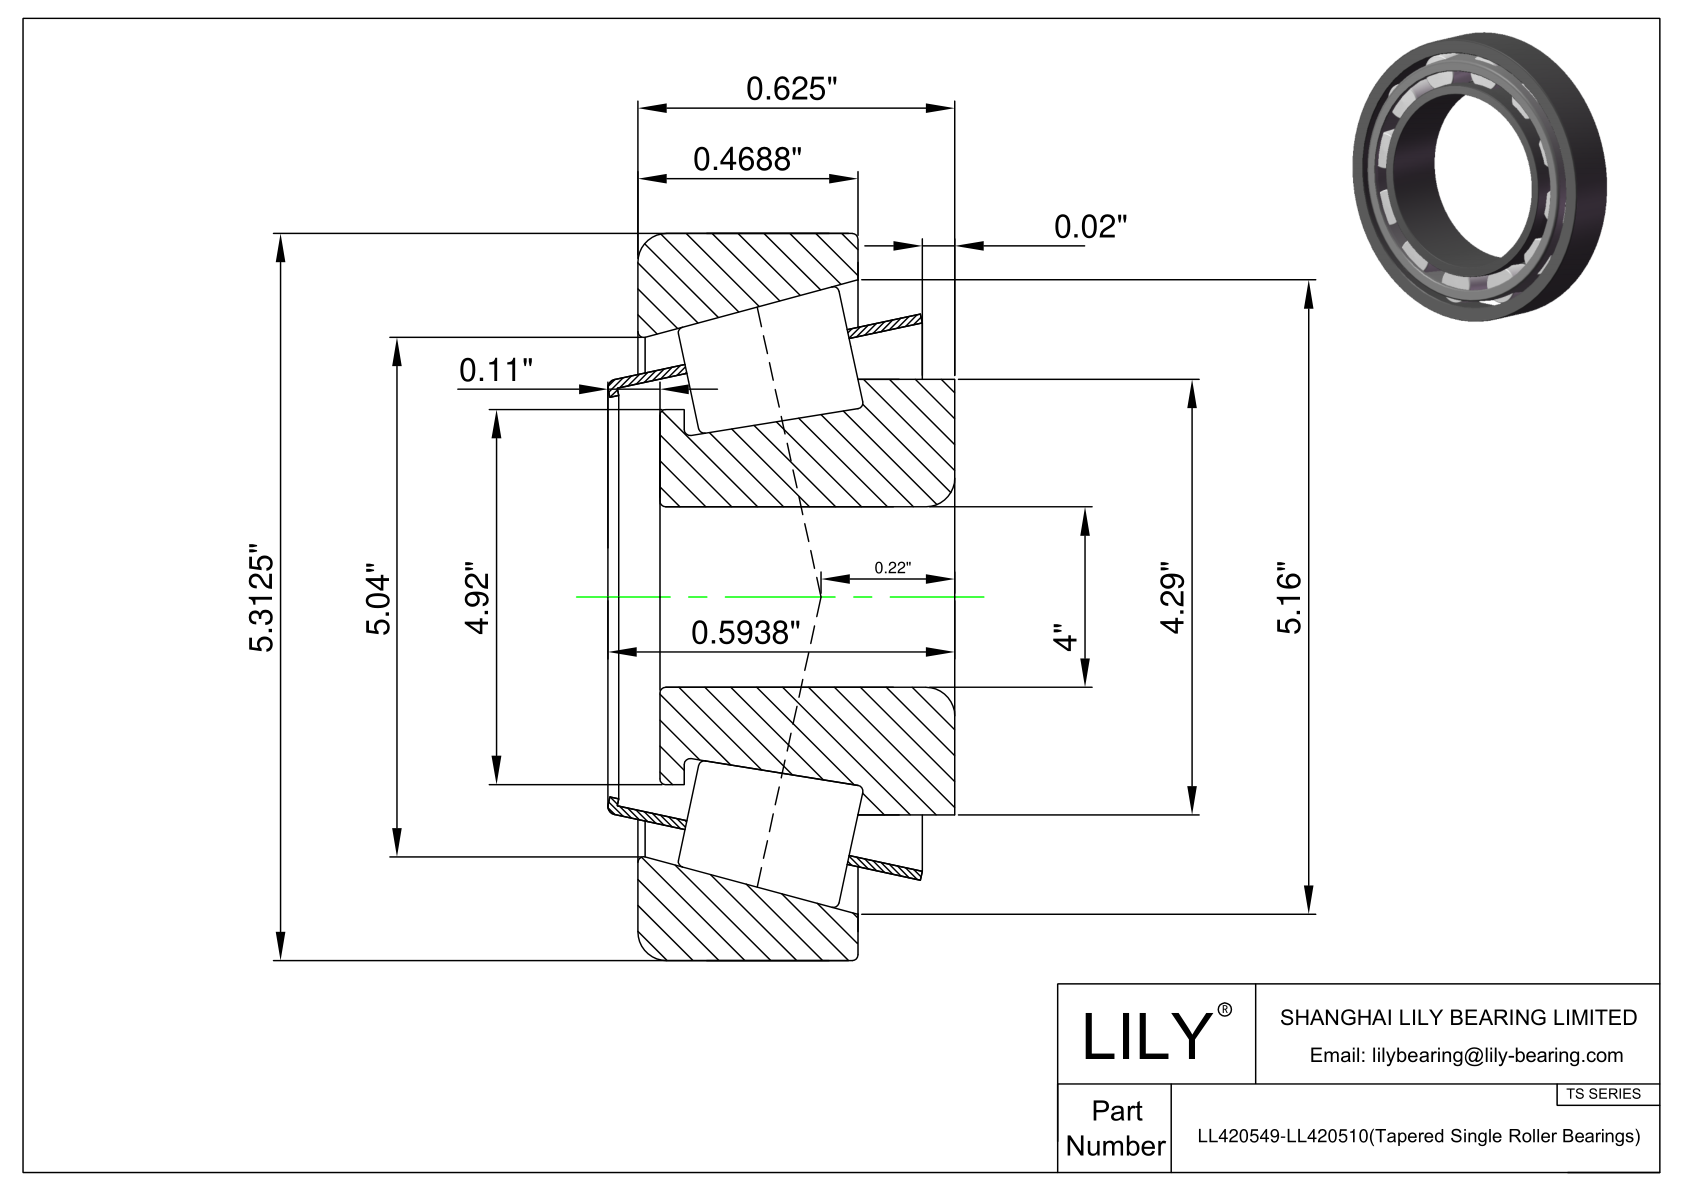 LL420549-LL420510 TS (Tapered Single Roller Bearings) (Imperial) cad drawing